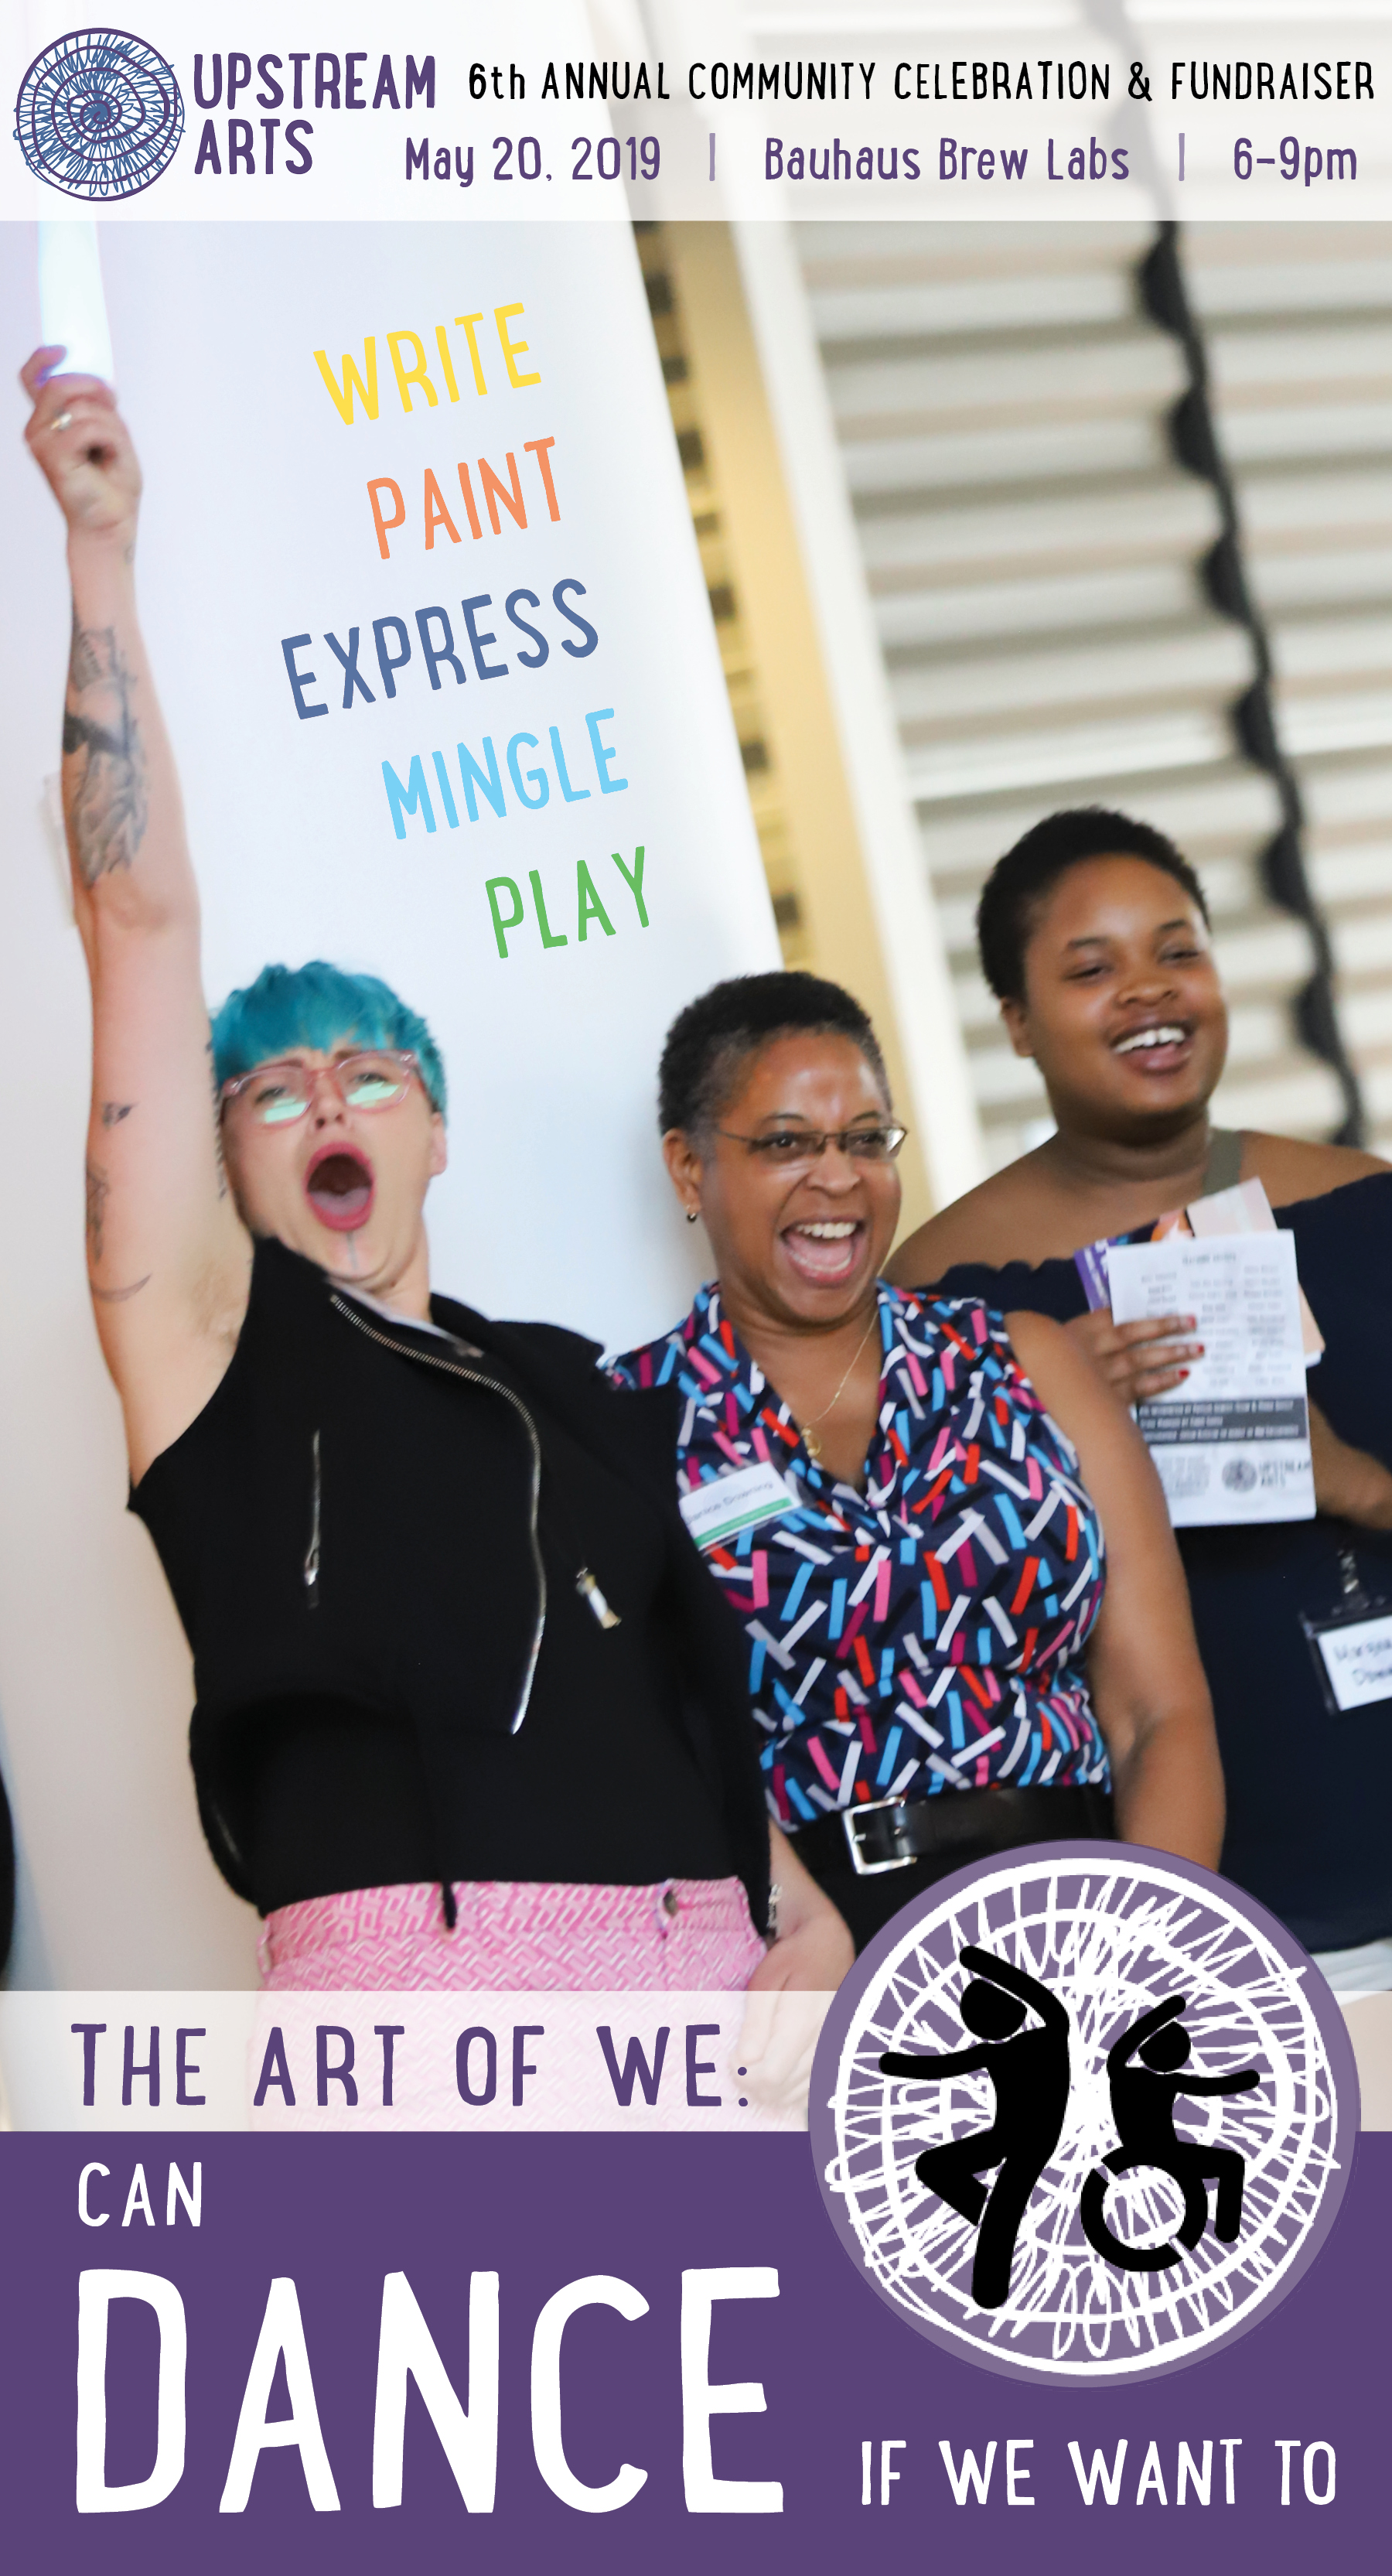 Postcard image of three people cheering and smiling at the Art of We event. Text reads: Upstream Arts 6th Annual Community Celebration & Fundraiser May 20, 2019 Bauhaus Brew Labs 6-9pm. Write Paint Express Mingle Play. The Art of We: Can Dance If We Want To